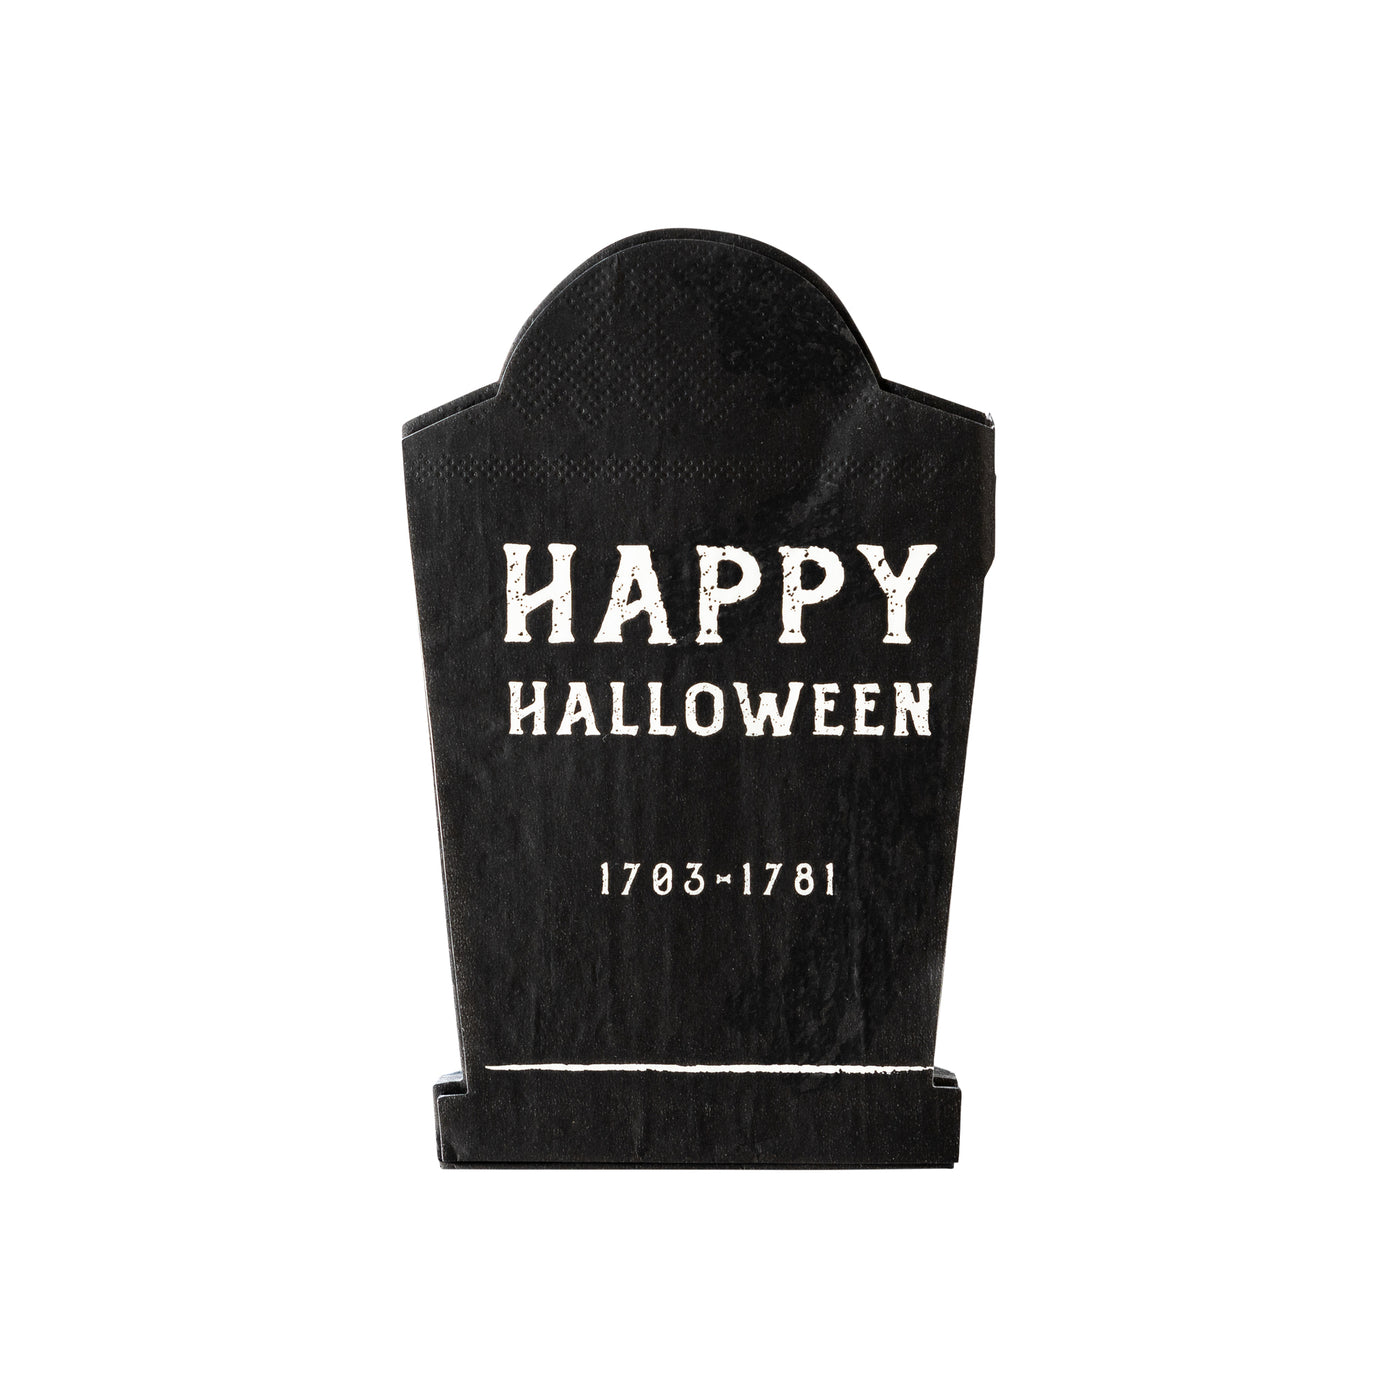 Haunted Village Tombstone Shaped Paper Dinner Napkin